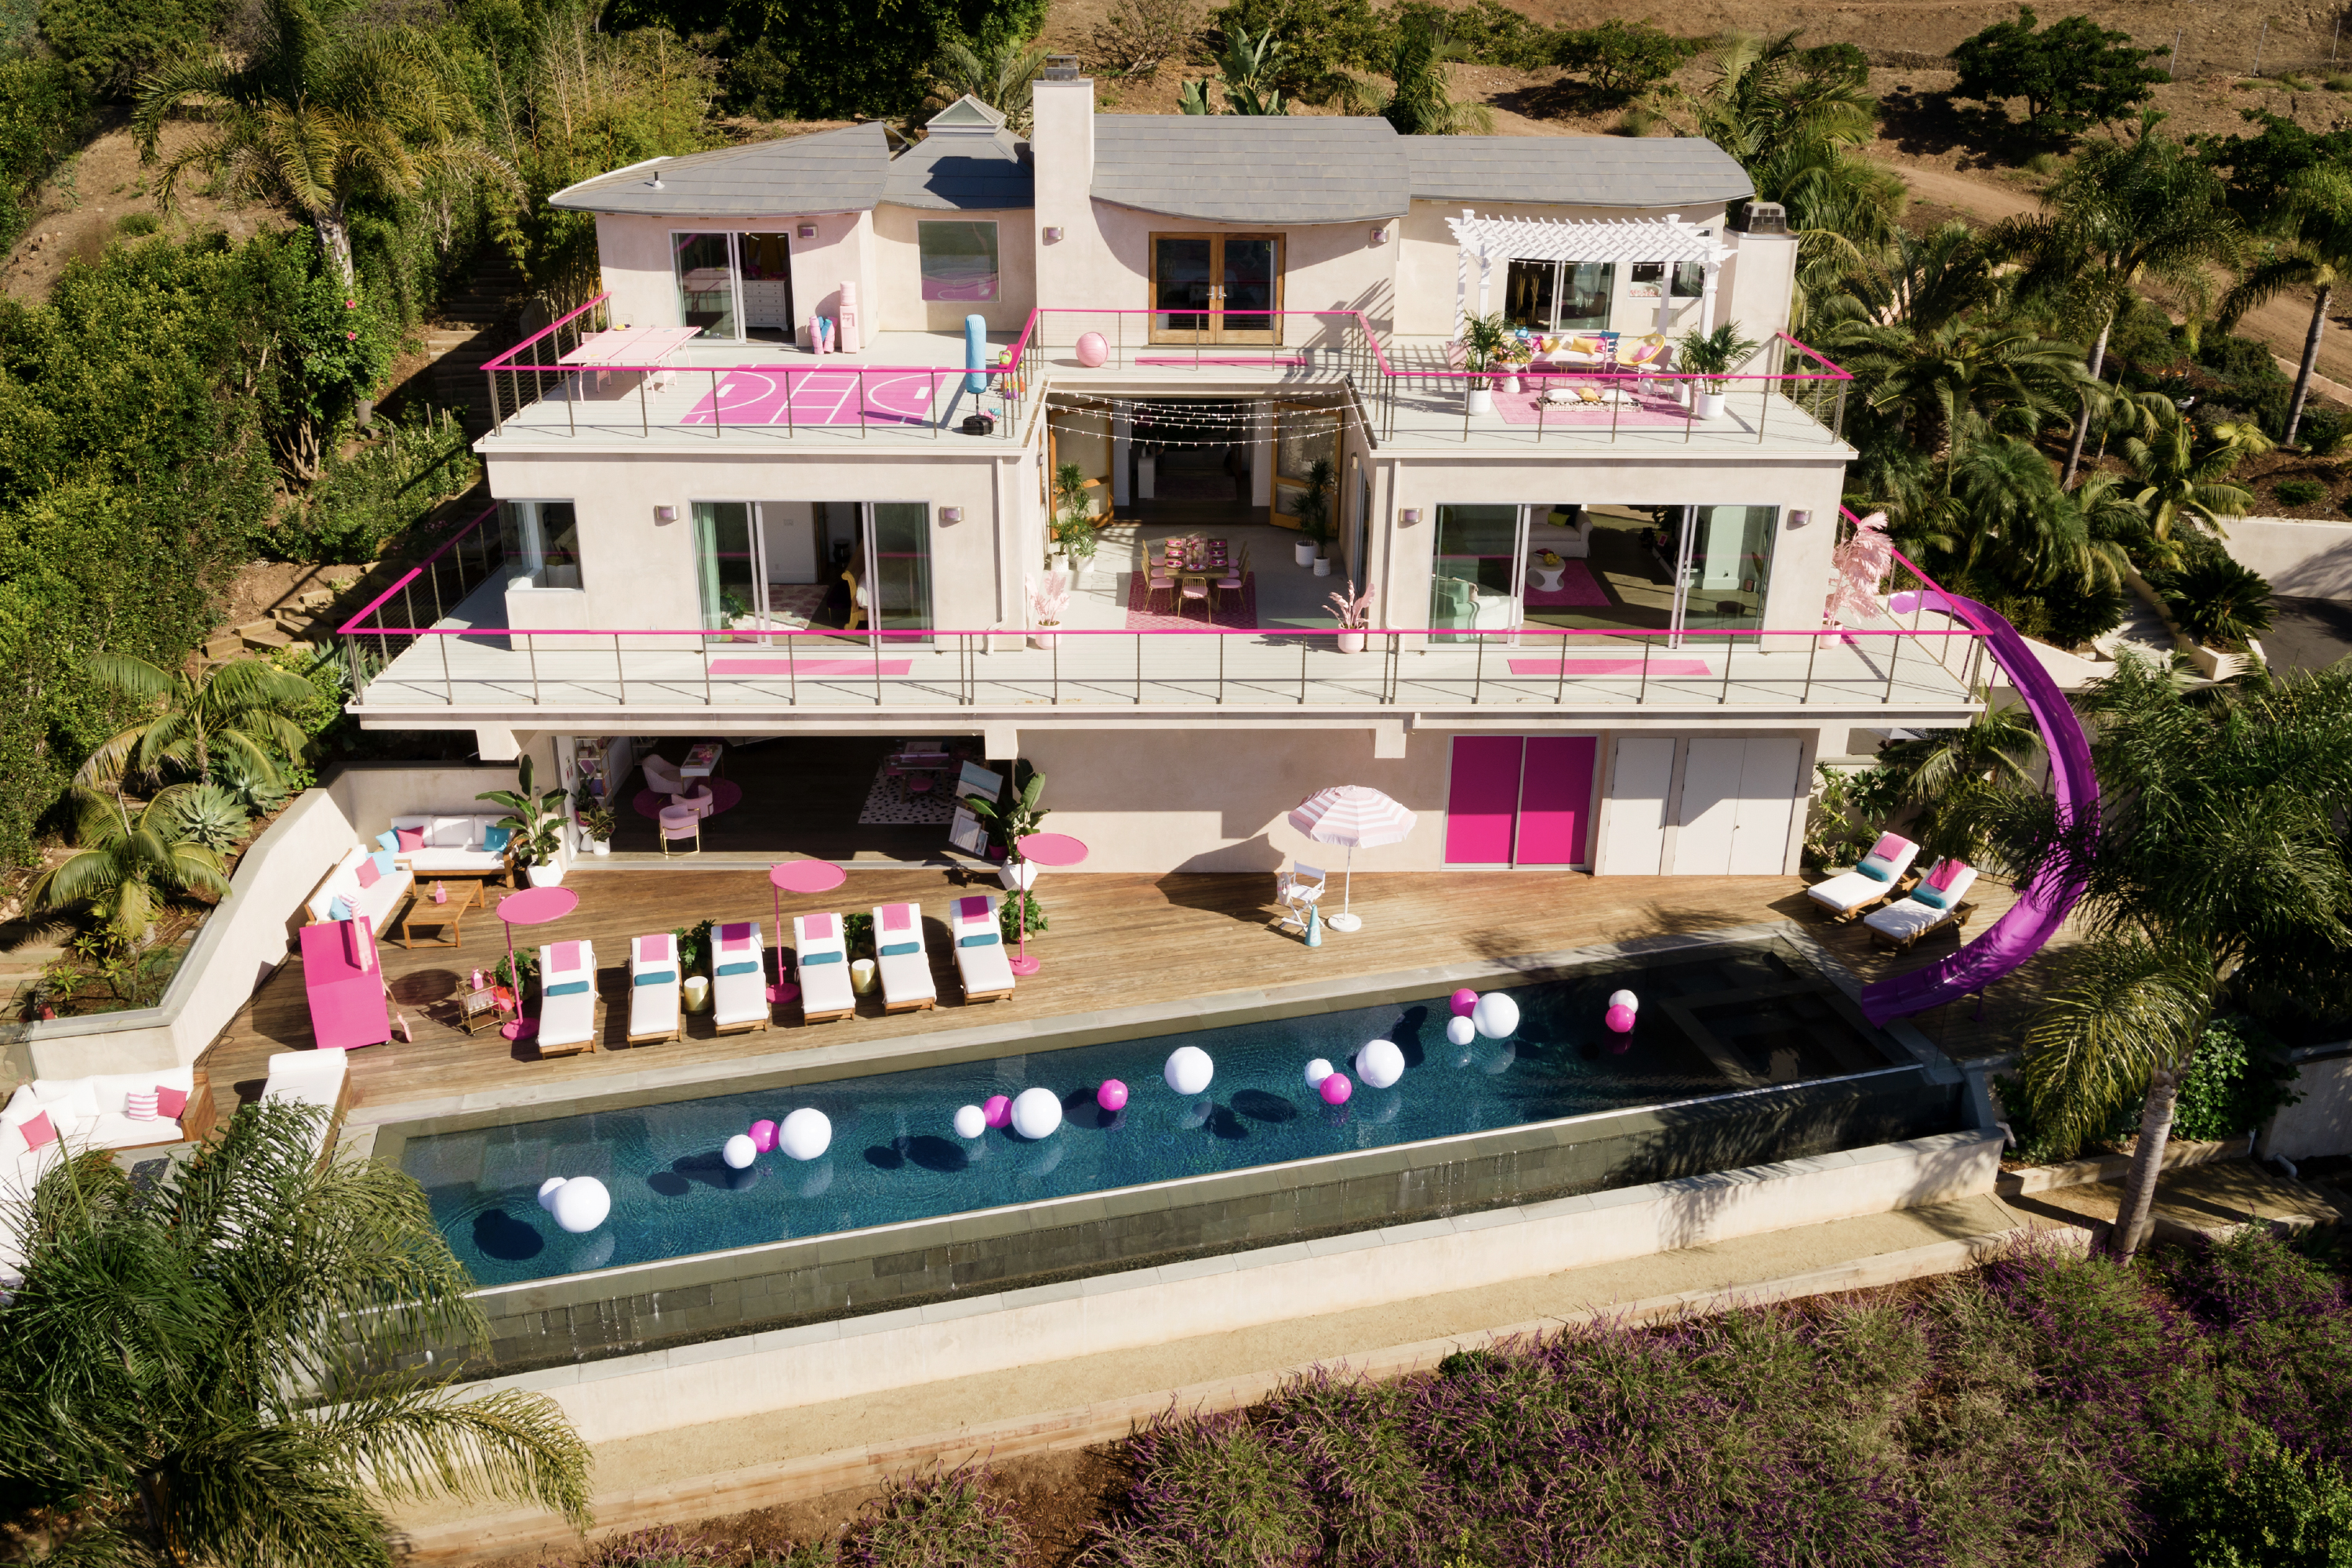 Barbie® the to Her Iconic Malibu Dreamhouse on Airbnb